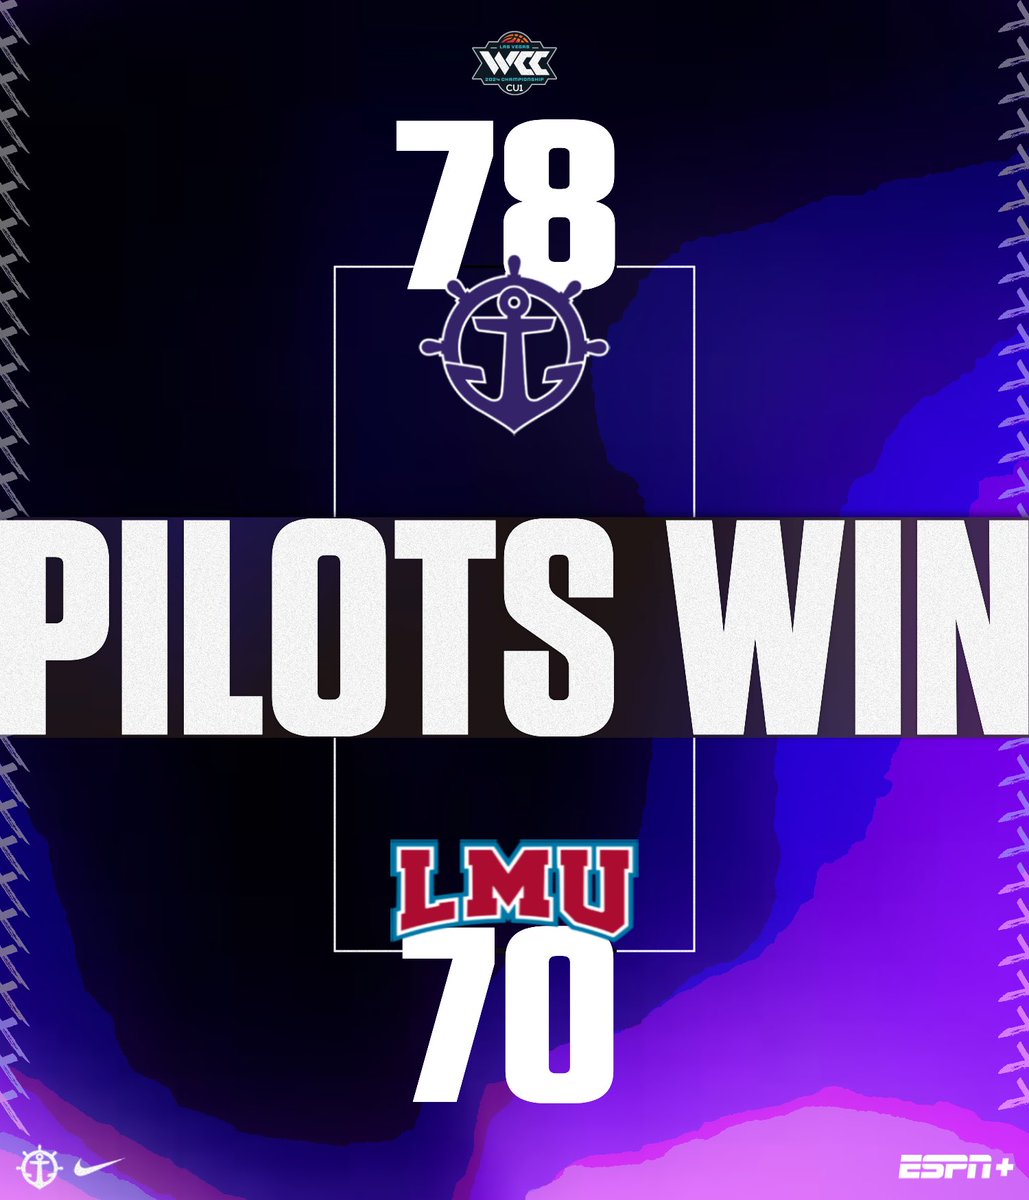 PILOTS ADVANCE‼️⏩ Read how they tamed the lions here! 😉➡️ bit.ly/43csvQd